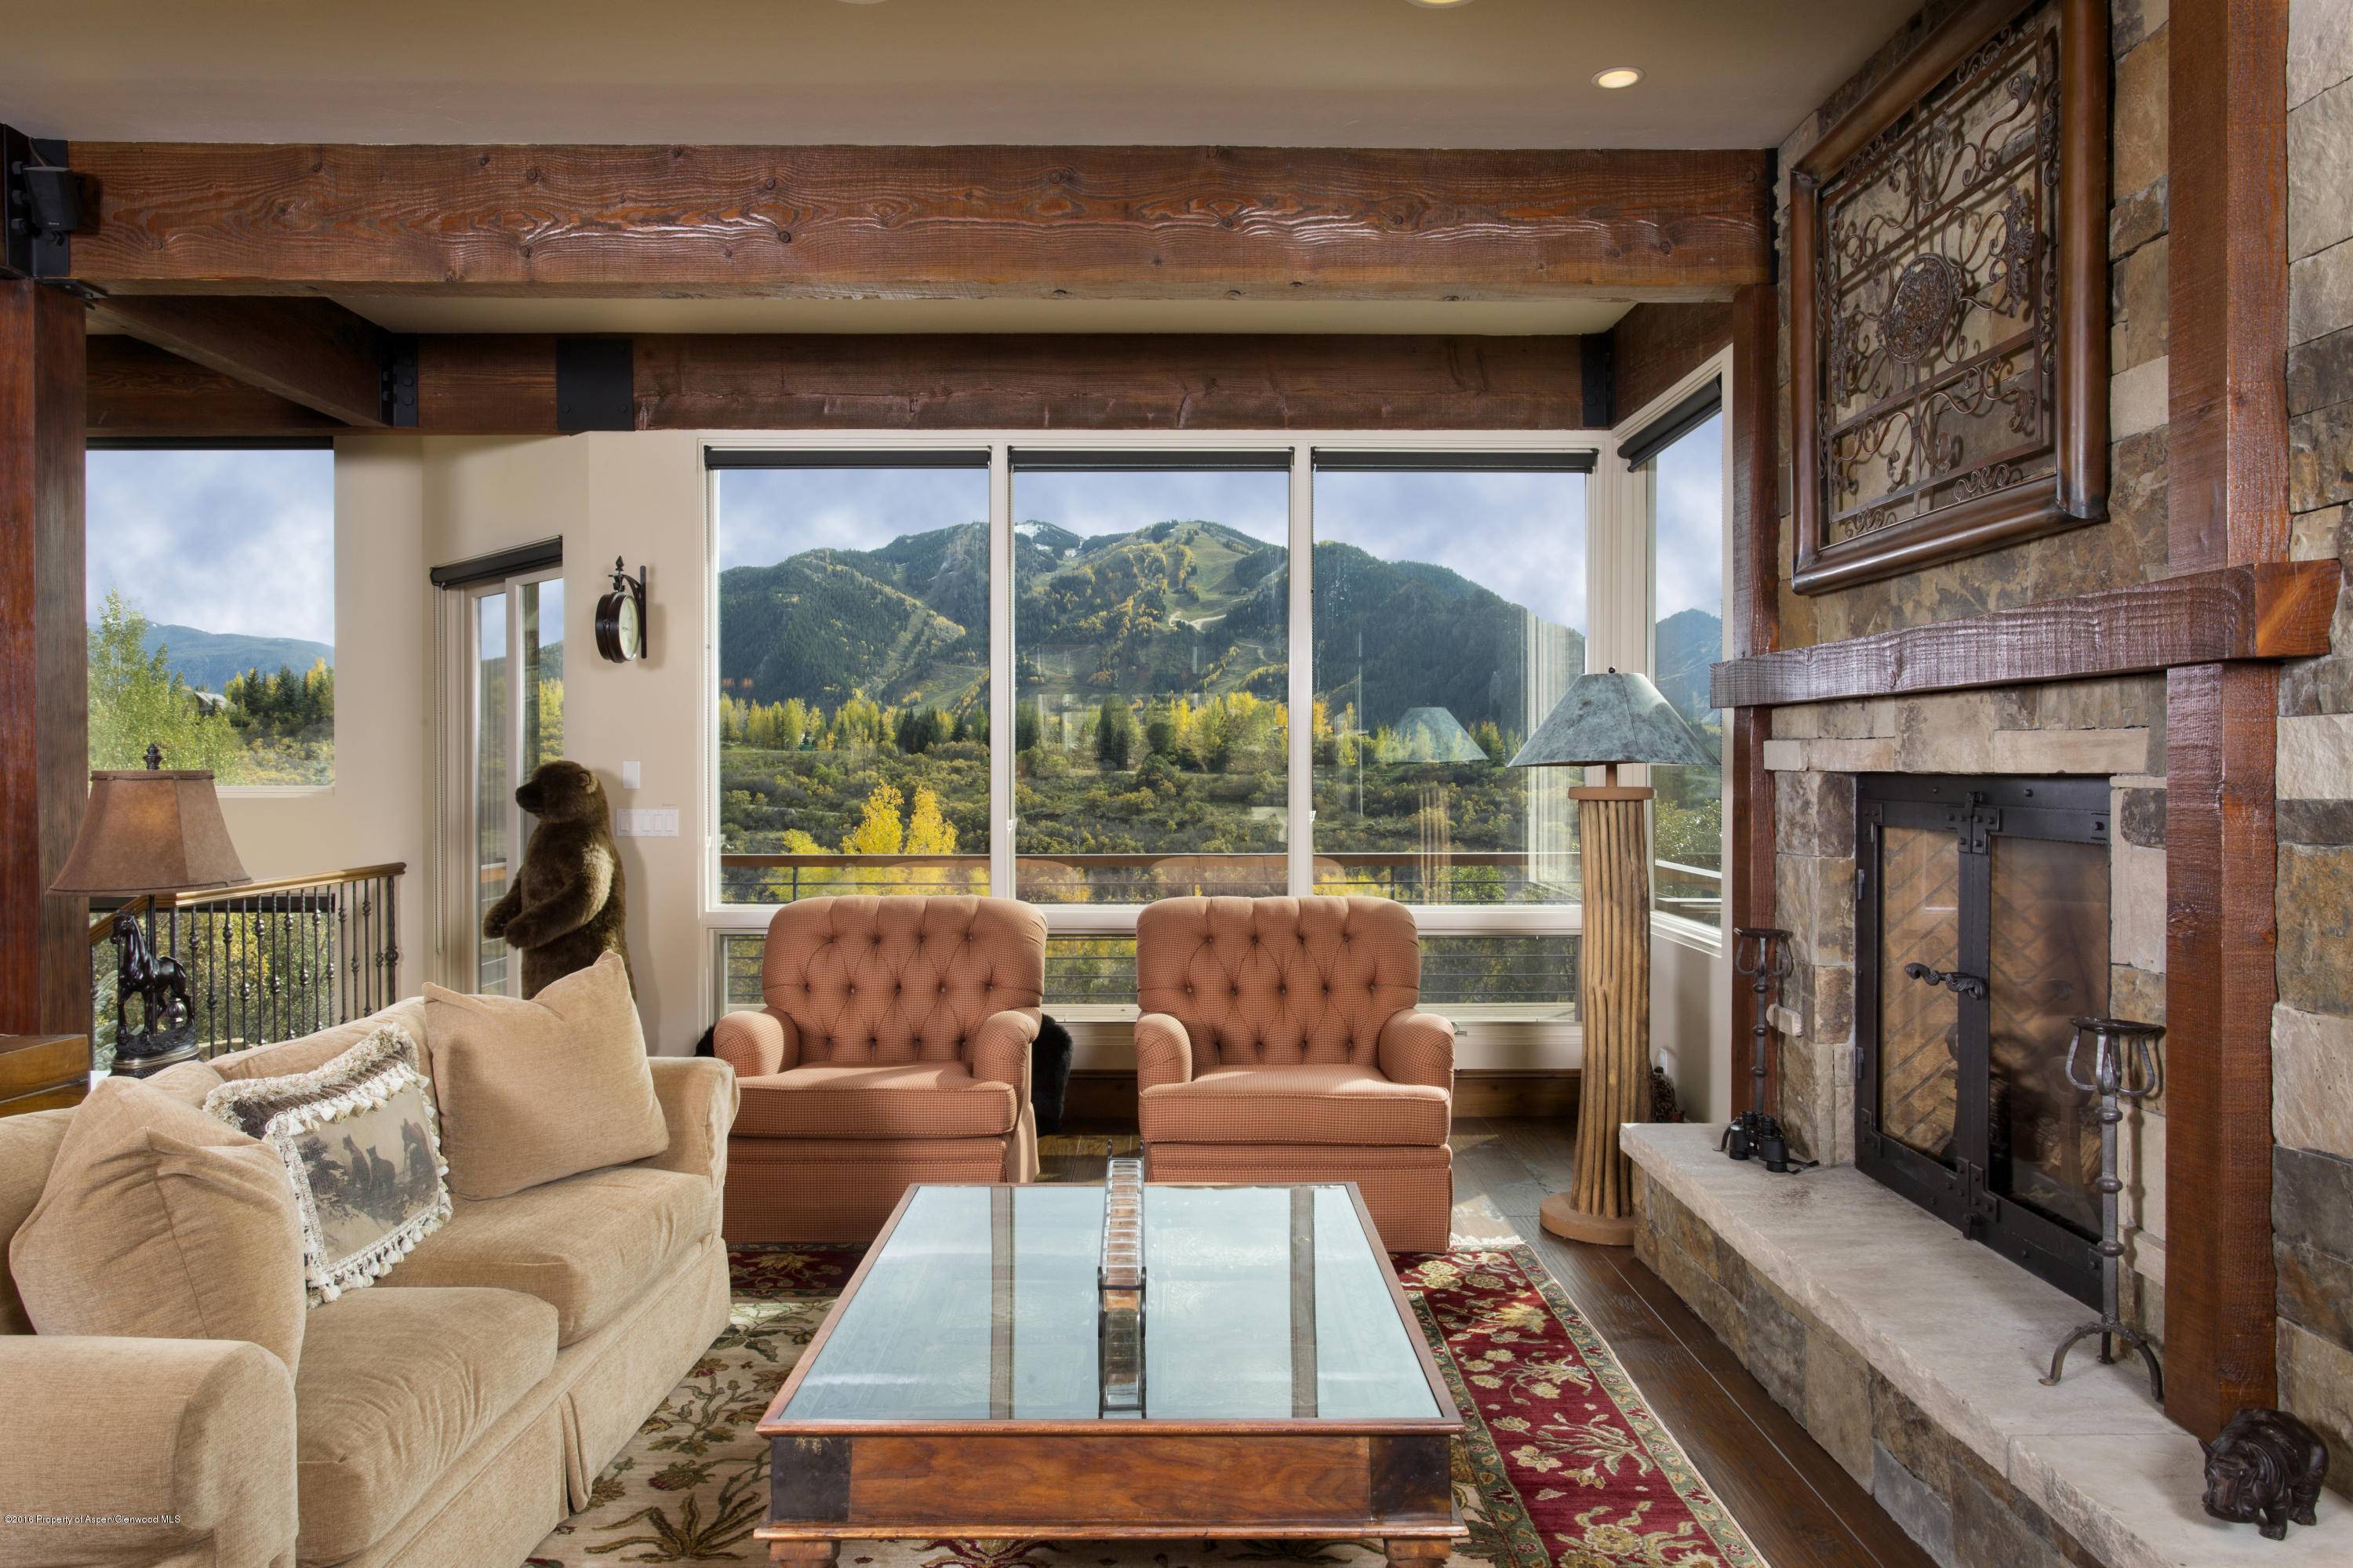 This spectacular five bedroom, four and a half bathroom home on mid Red Mountain boasts direct Aspen Mountain views and the Roaring Fork Valley beyond.